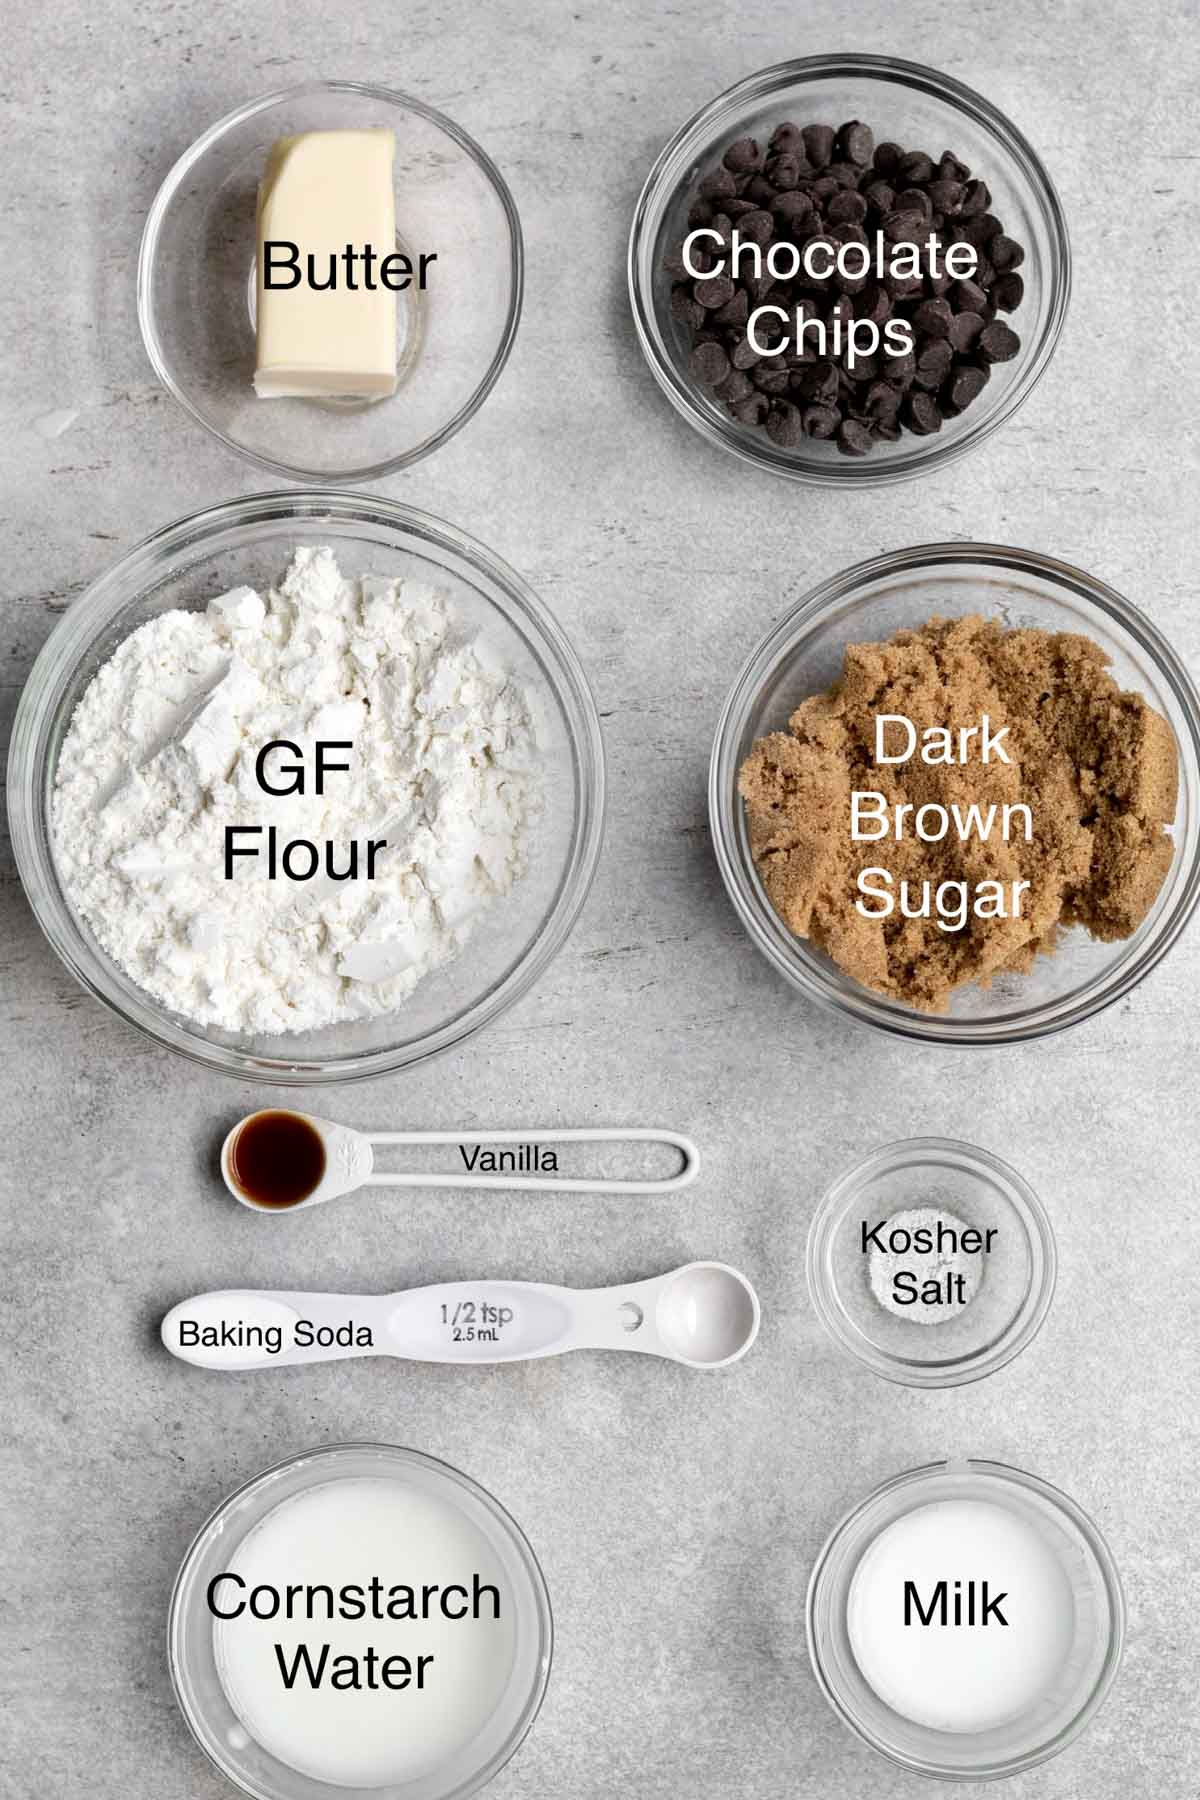 The ingredients for the cookies in separate containers with their text names over it.